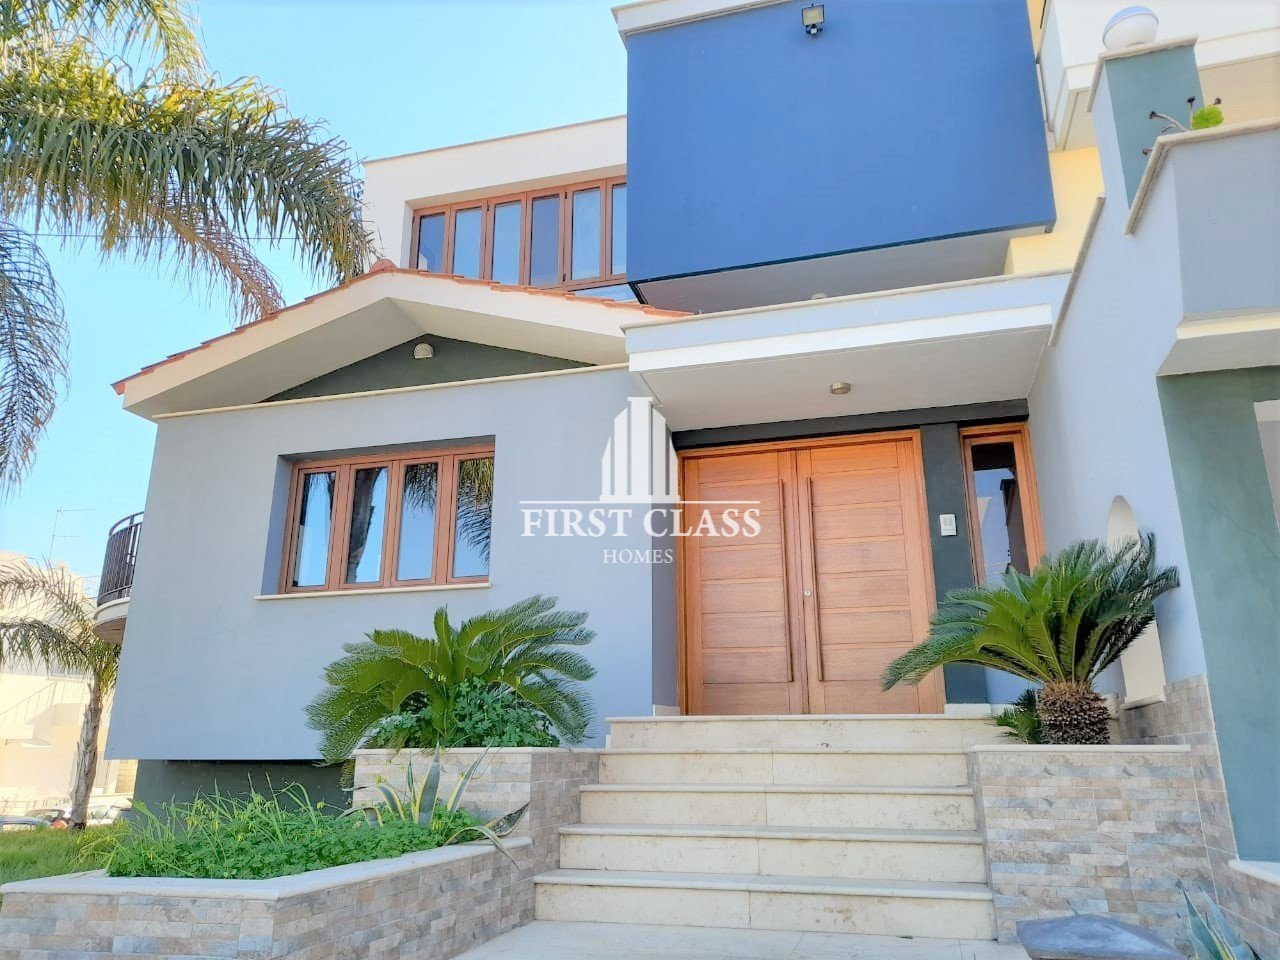 Property for Rent: House (Detached) in Engomi, Nicosia for Rent | Key Realtor Cyprus